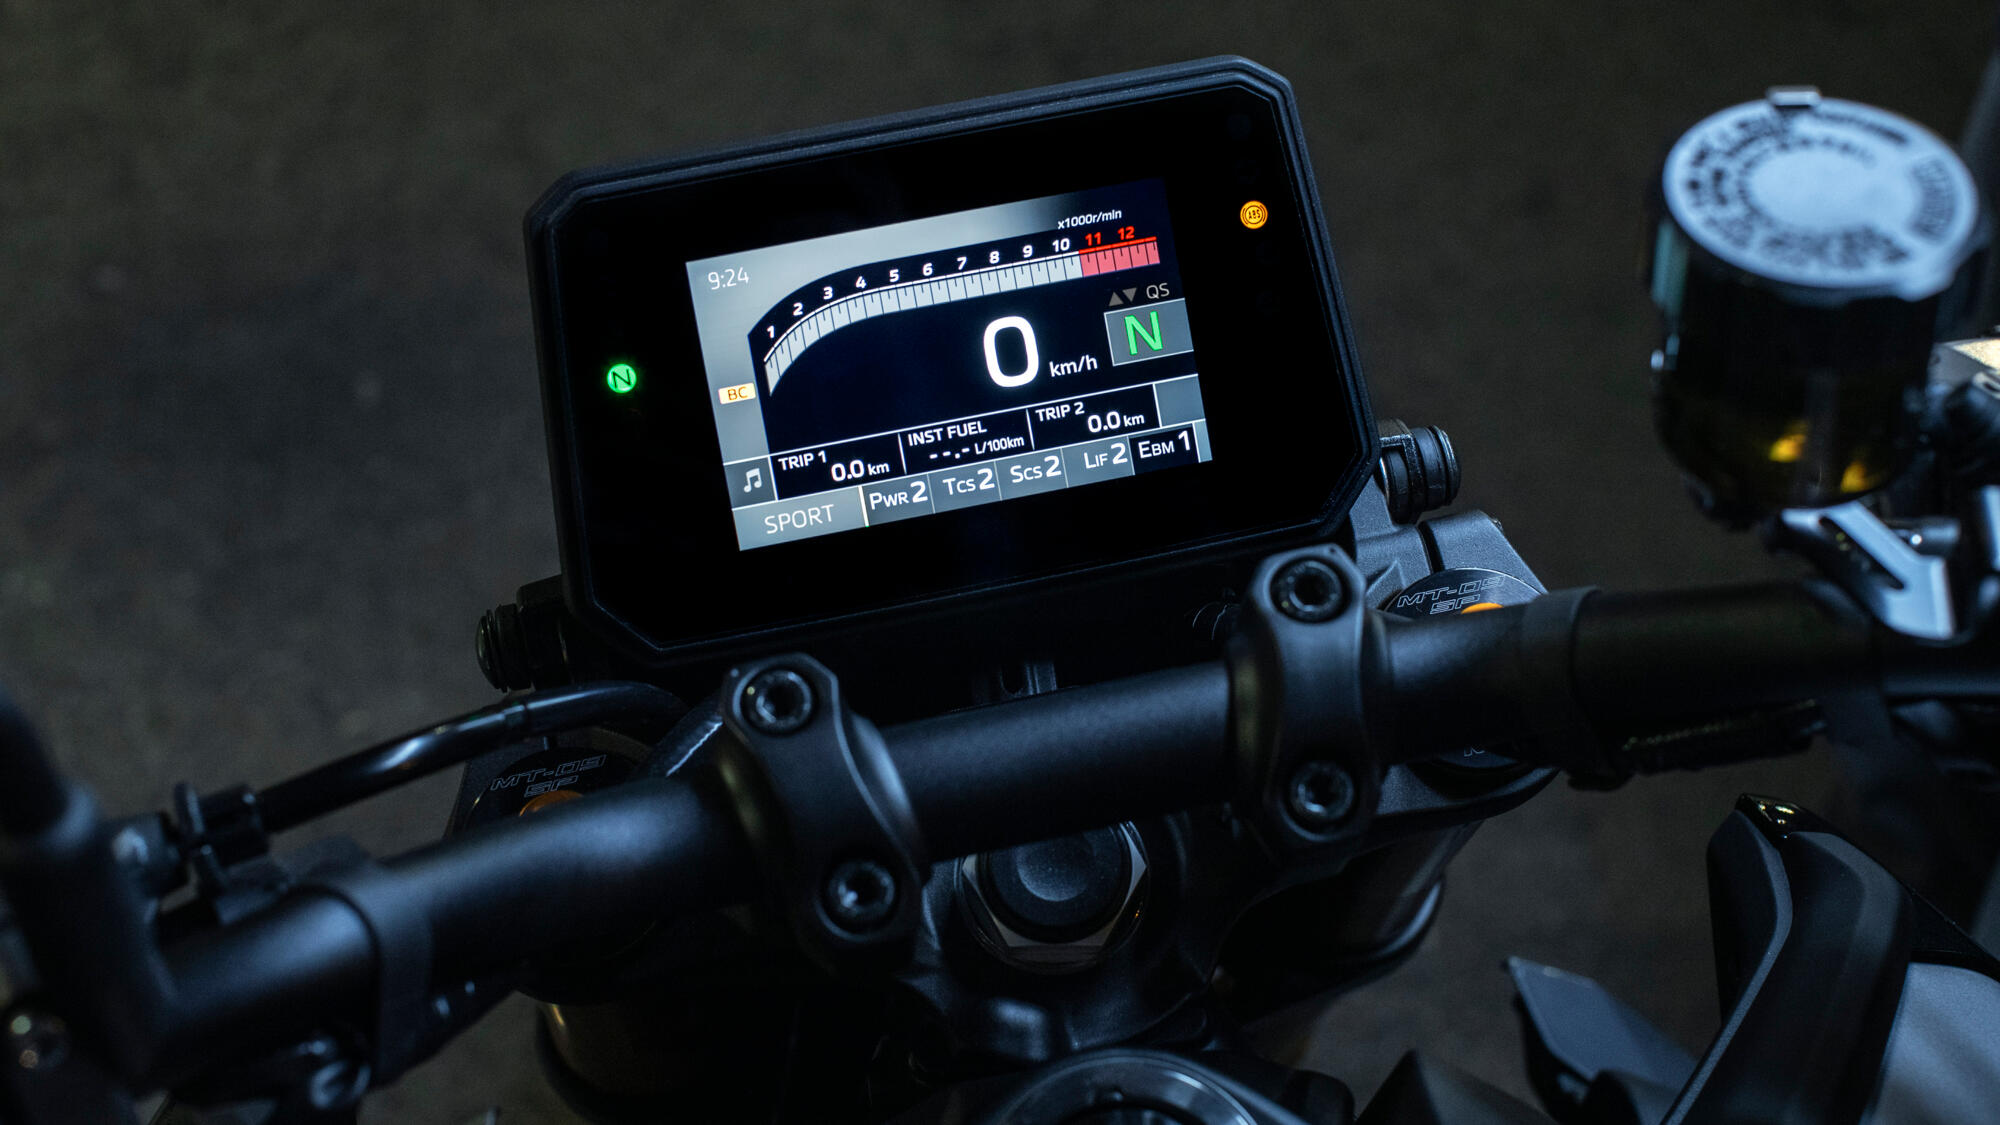 Full colour 5-inch TFT display with connectivity and navigation